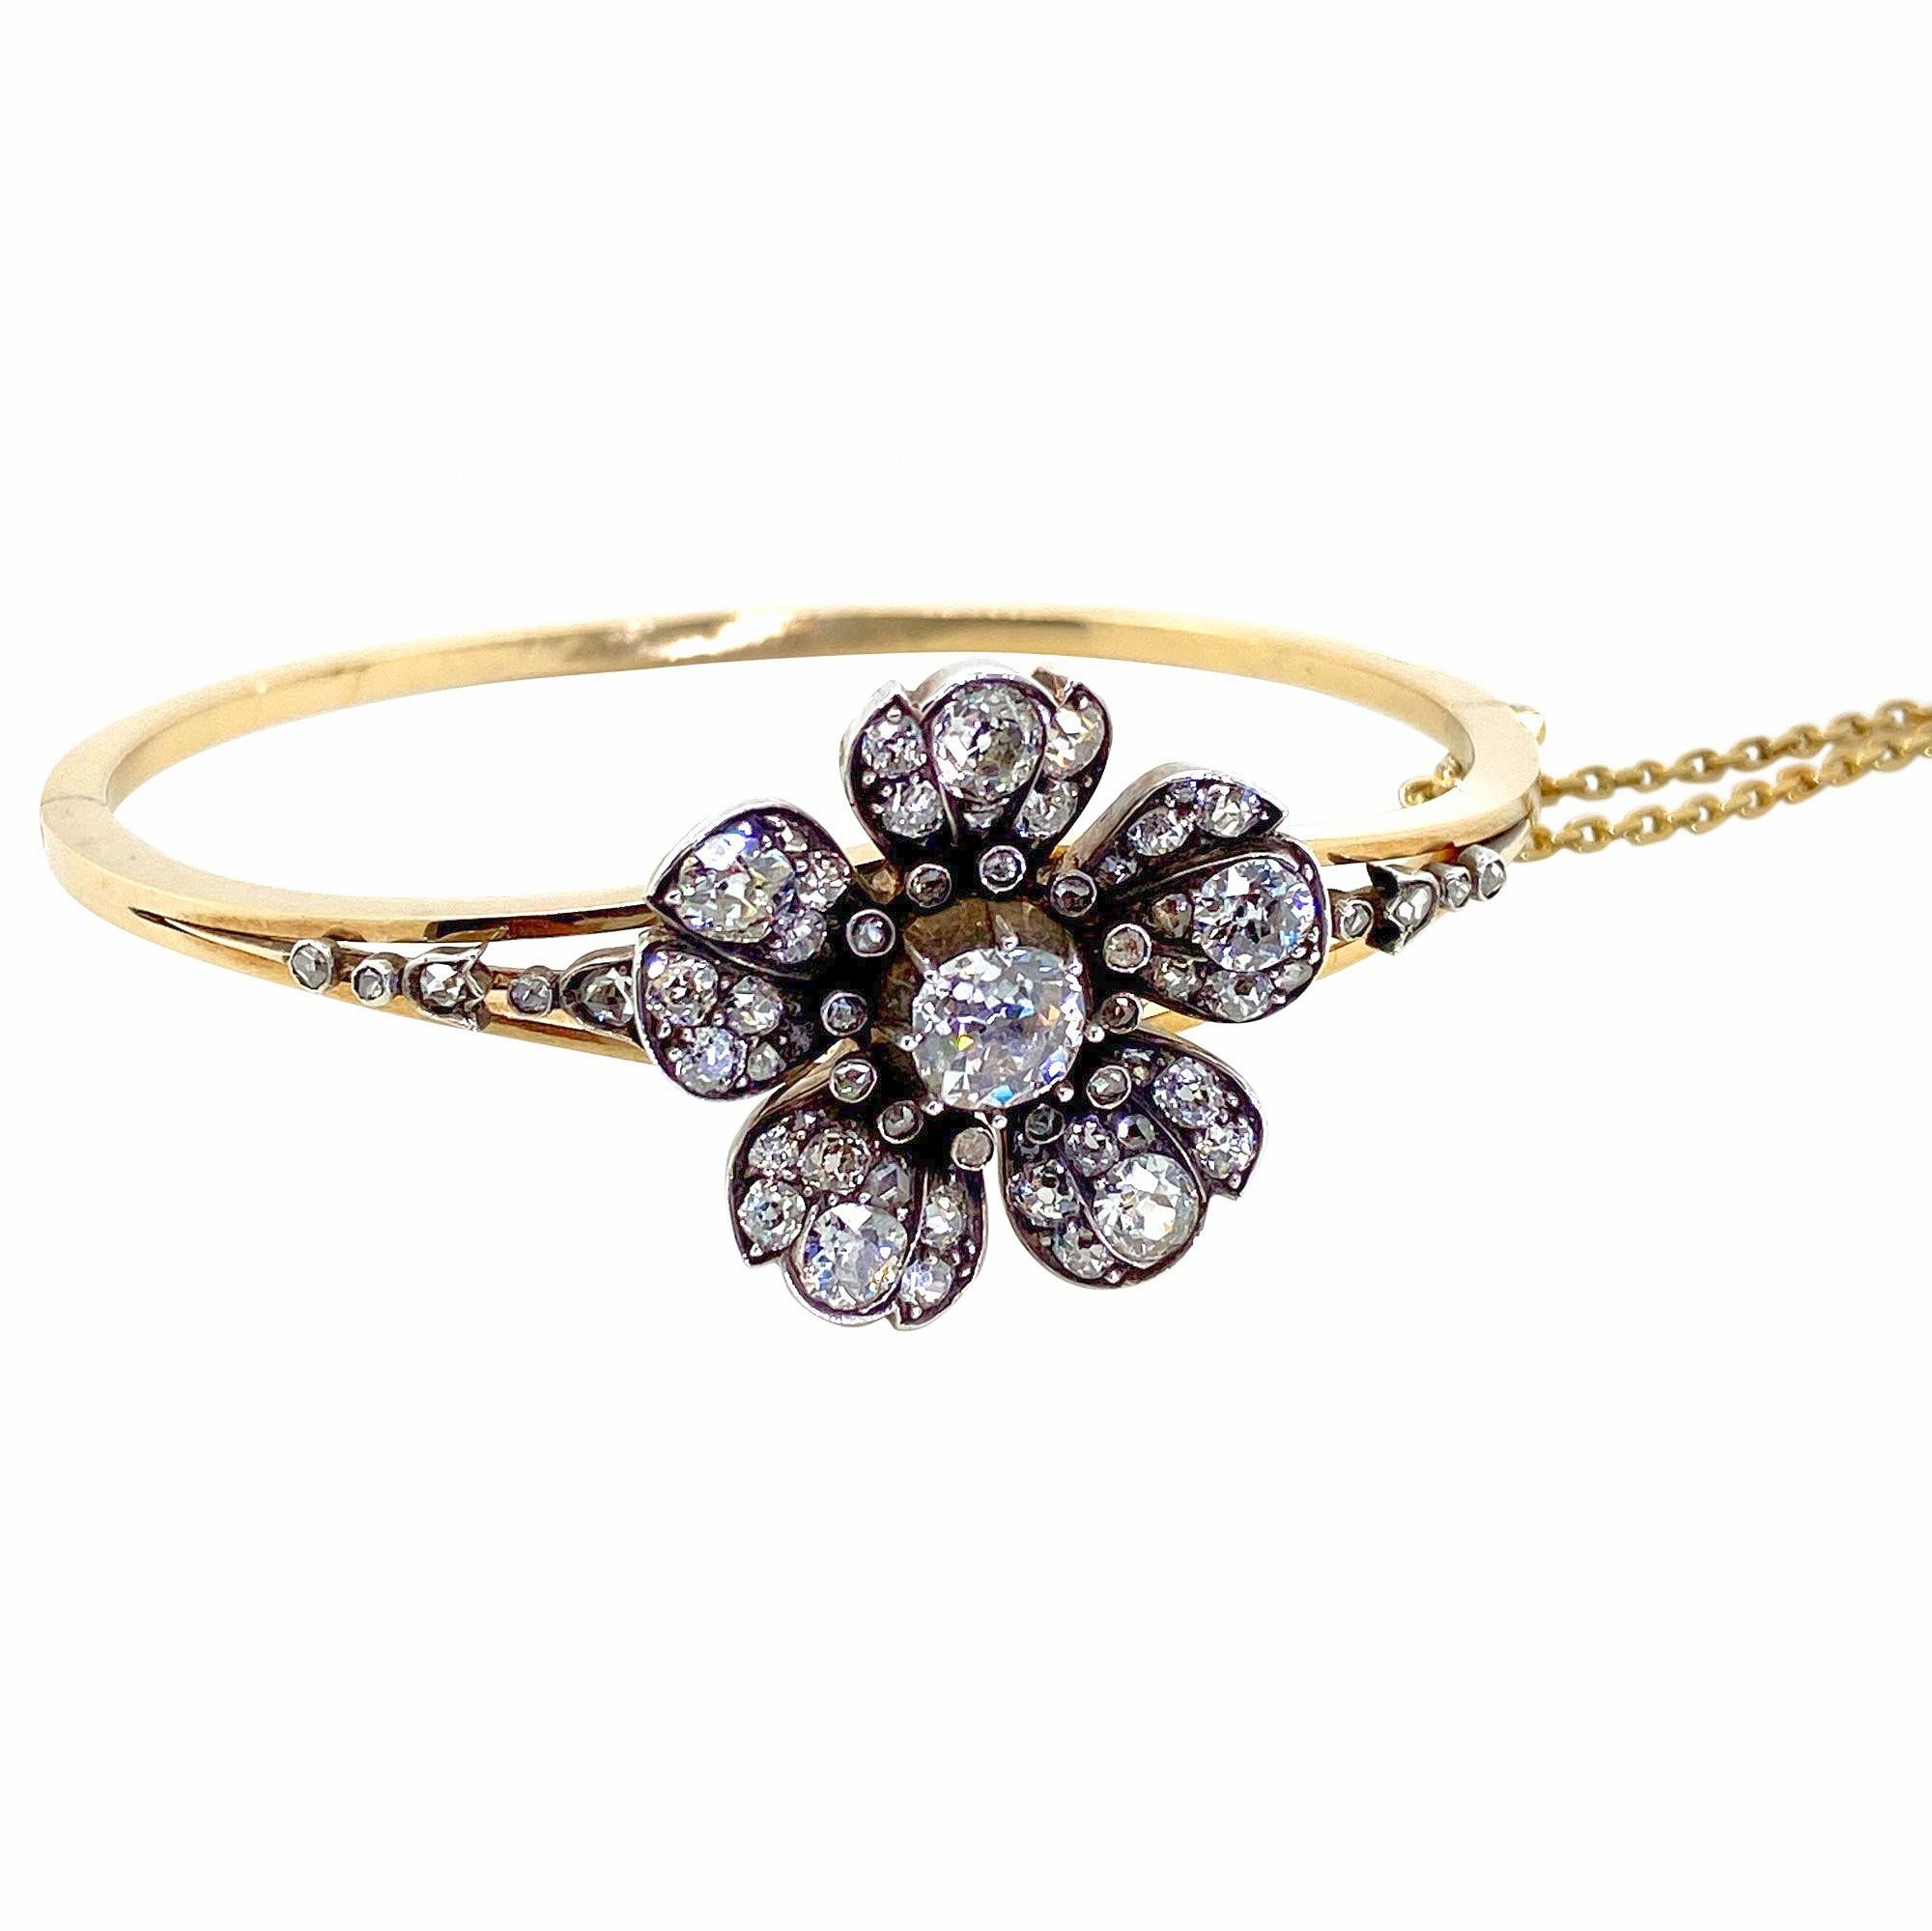 Flowers are always beautiful to receive as a gift, but why not give flowers that are everlasting! Diamond flowers of course, what could be better? This antique bangle is a pretty jewel in every sense. From the delicate flower head to the finely